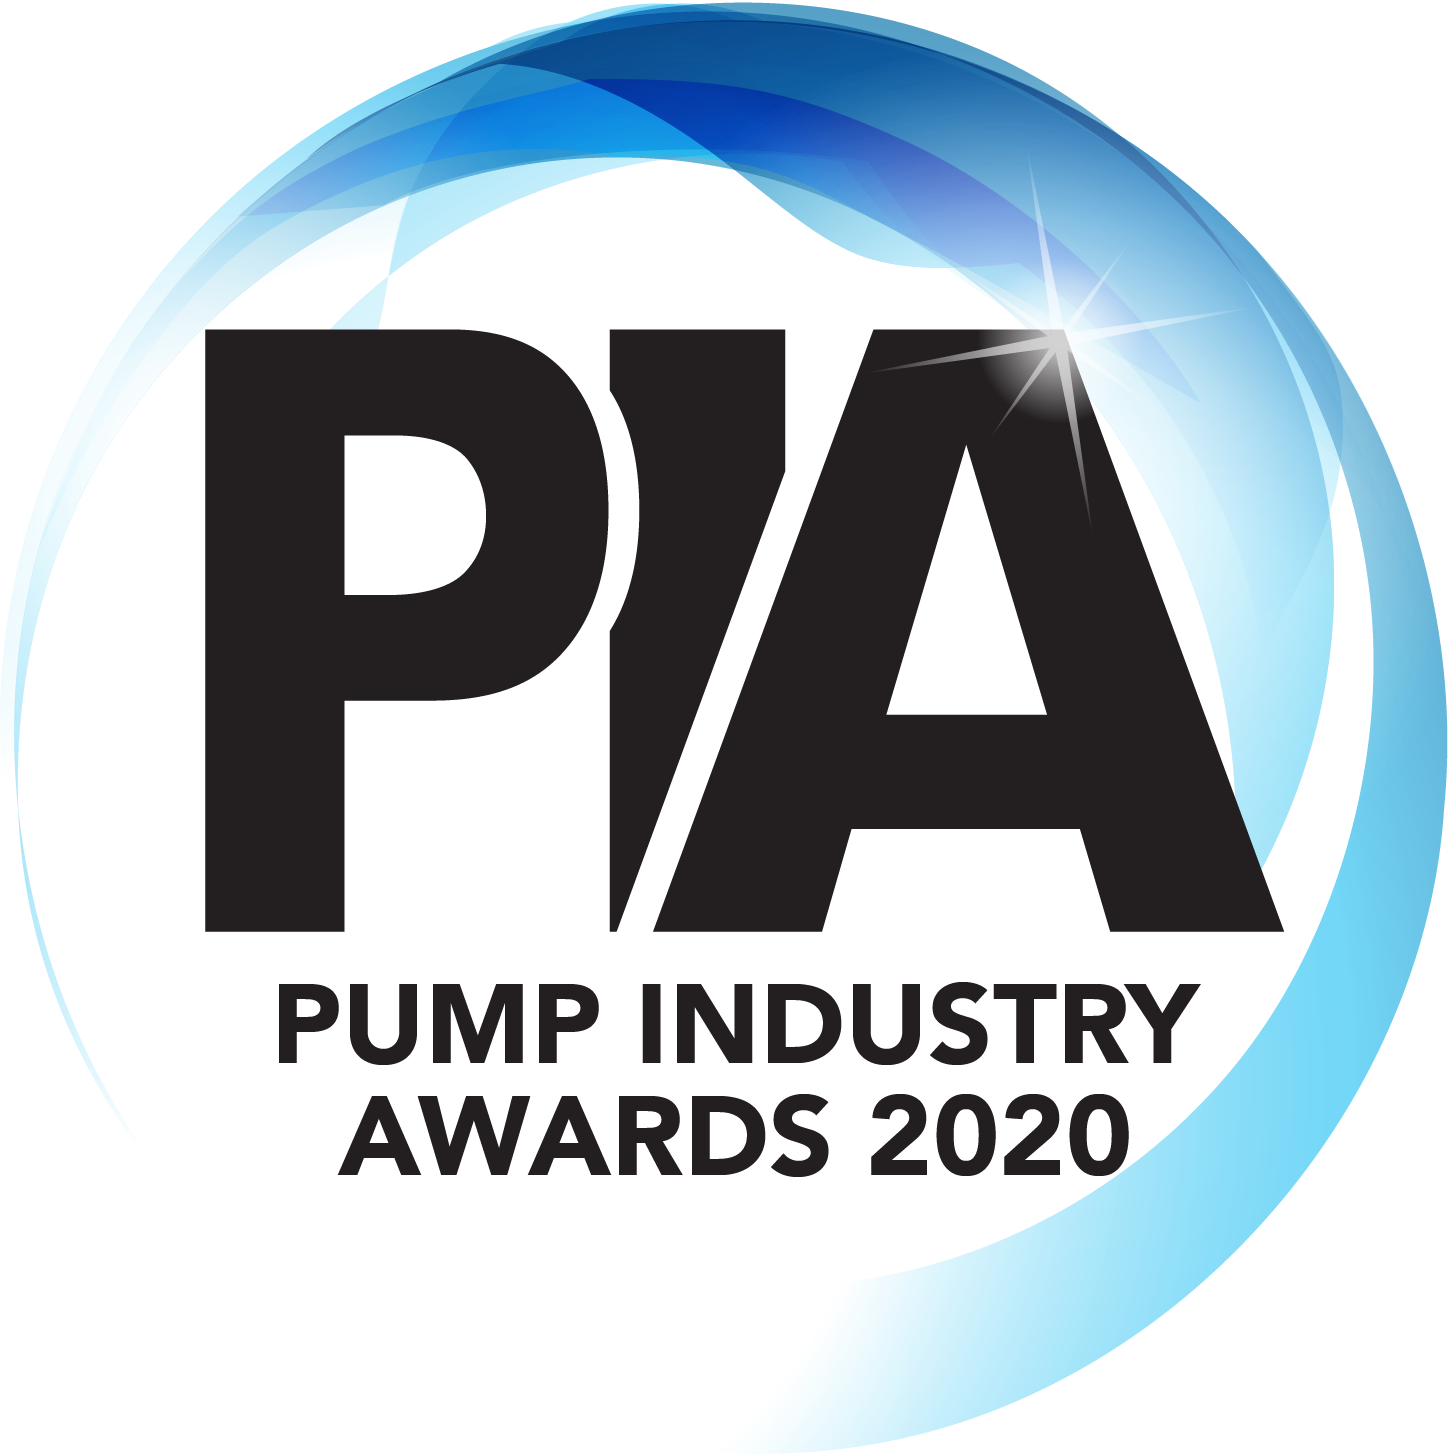 This year is the 20th anniversary of the Pump Industry Awards.